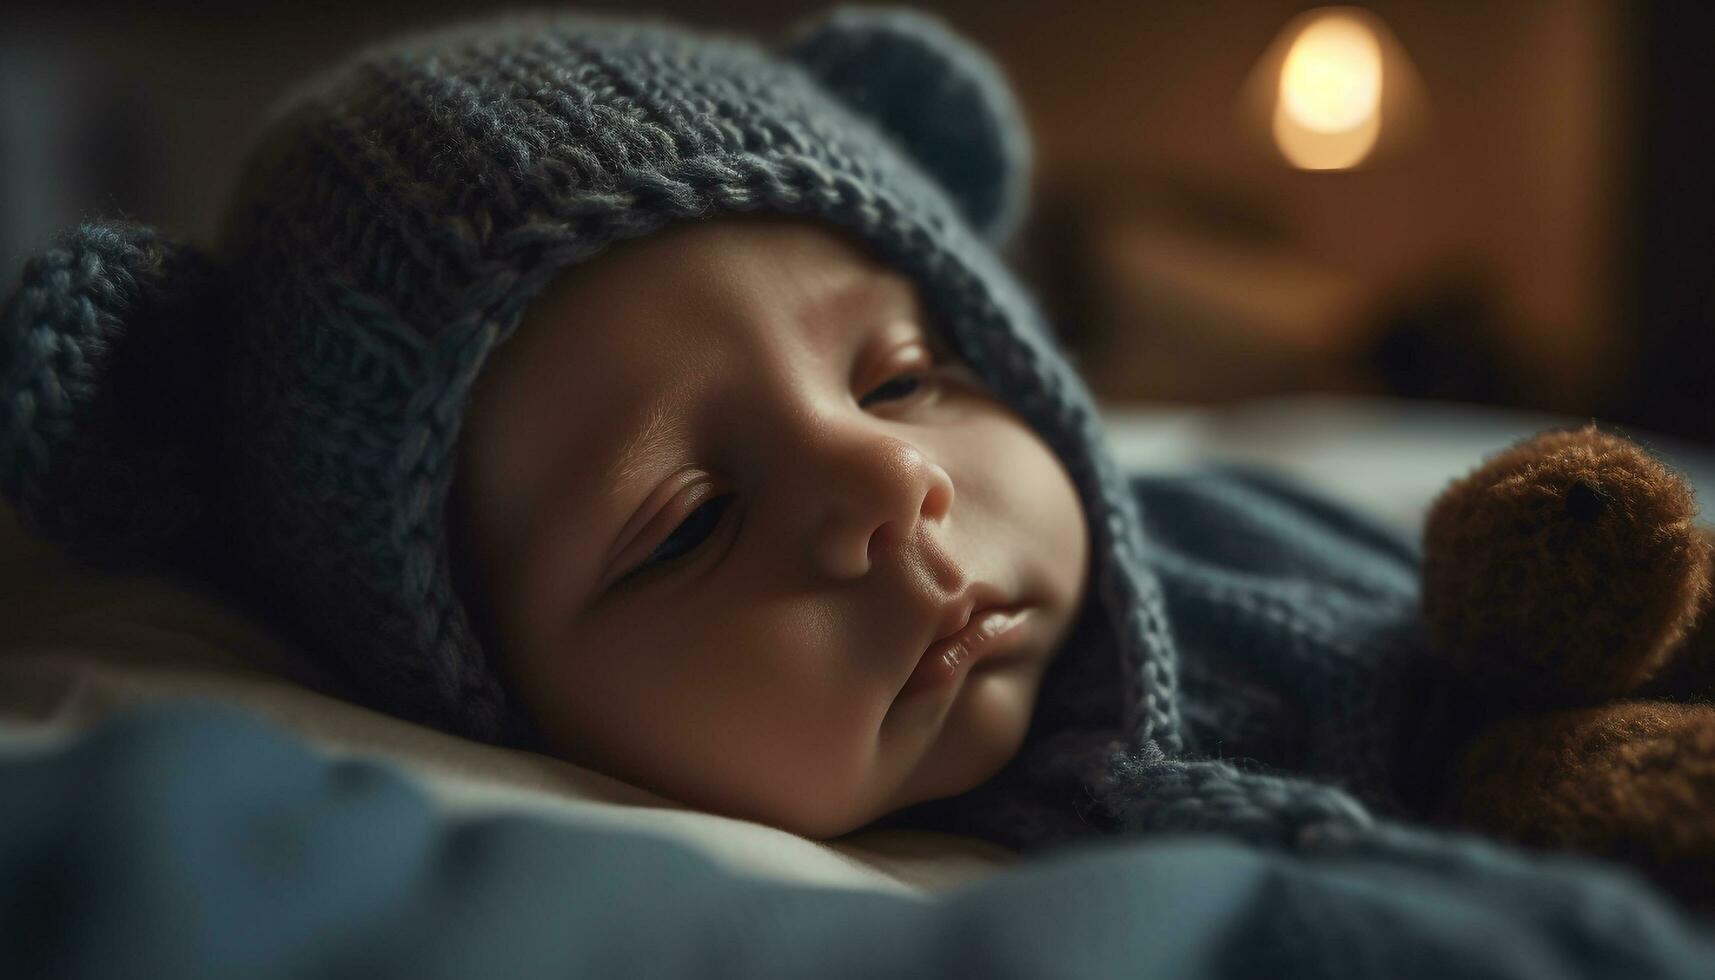 Cute baby boy sleeping peacefully wrapped in warm knit blanket generated by AI photo